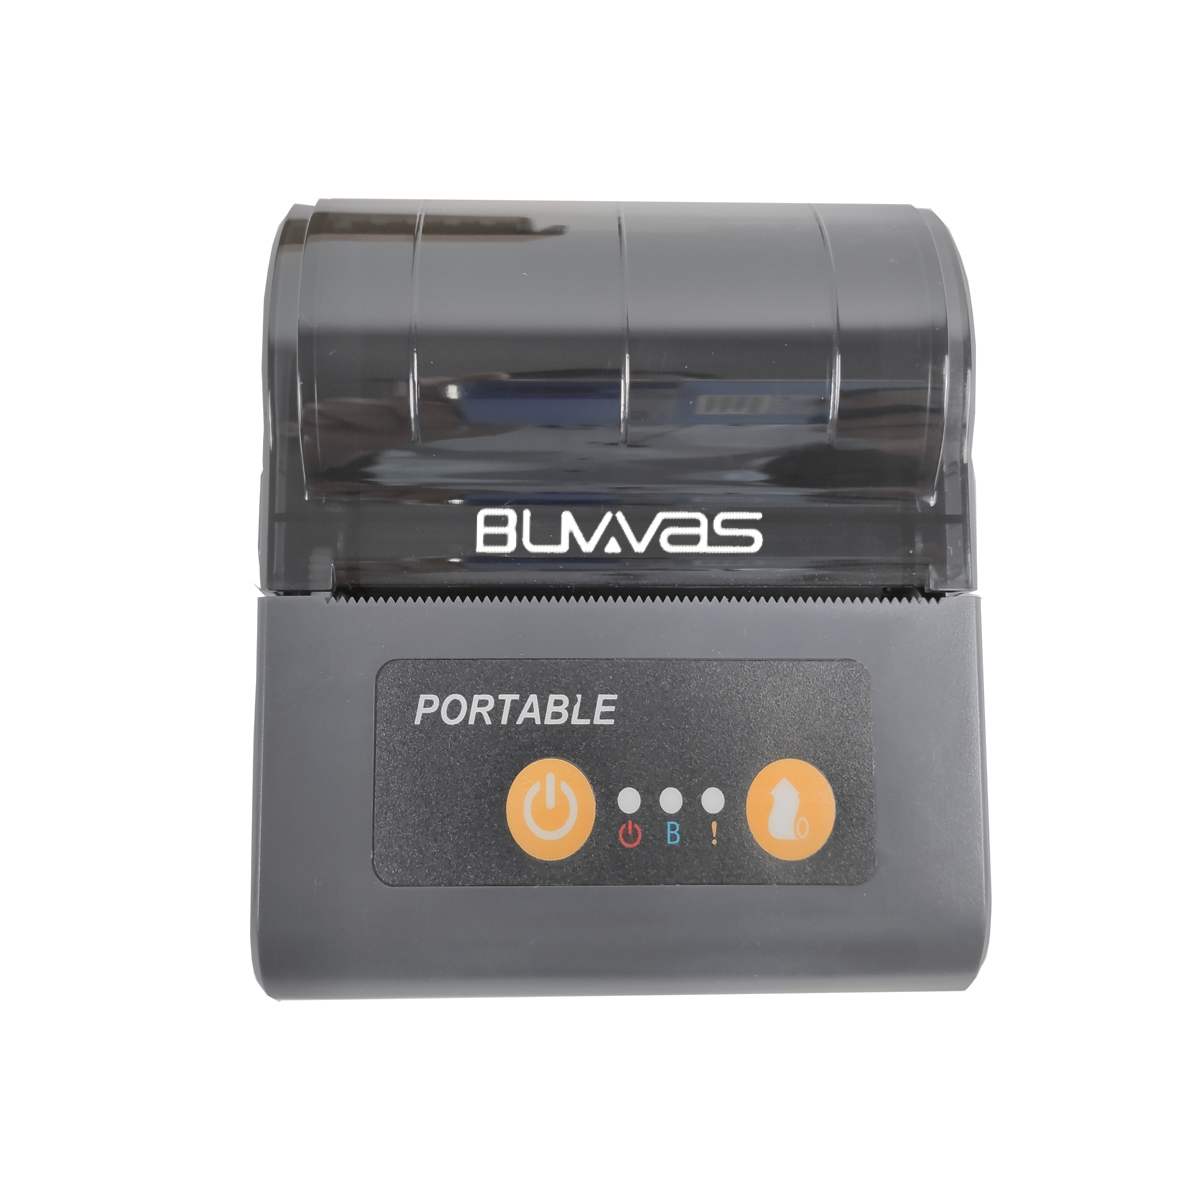 Buvvas HS-88AI Thermal Receipt Printer Regular priceRs. 7,999.00 Sale priceRs. 5,500.00Sale Tax included. Key Specifications Interface: USB+Bluetooth Print Size: 80mm(3 Inch) Printer Speed: 80mm/sec Printer Head Life : 30KM Manual Cut Battery Capacity: 1500mAh Interface USB + BLUETOOTH